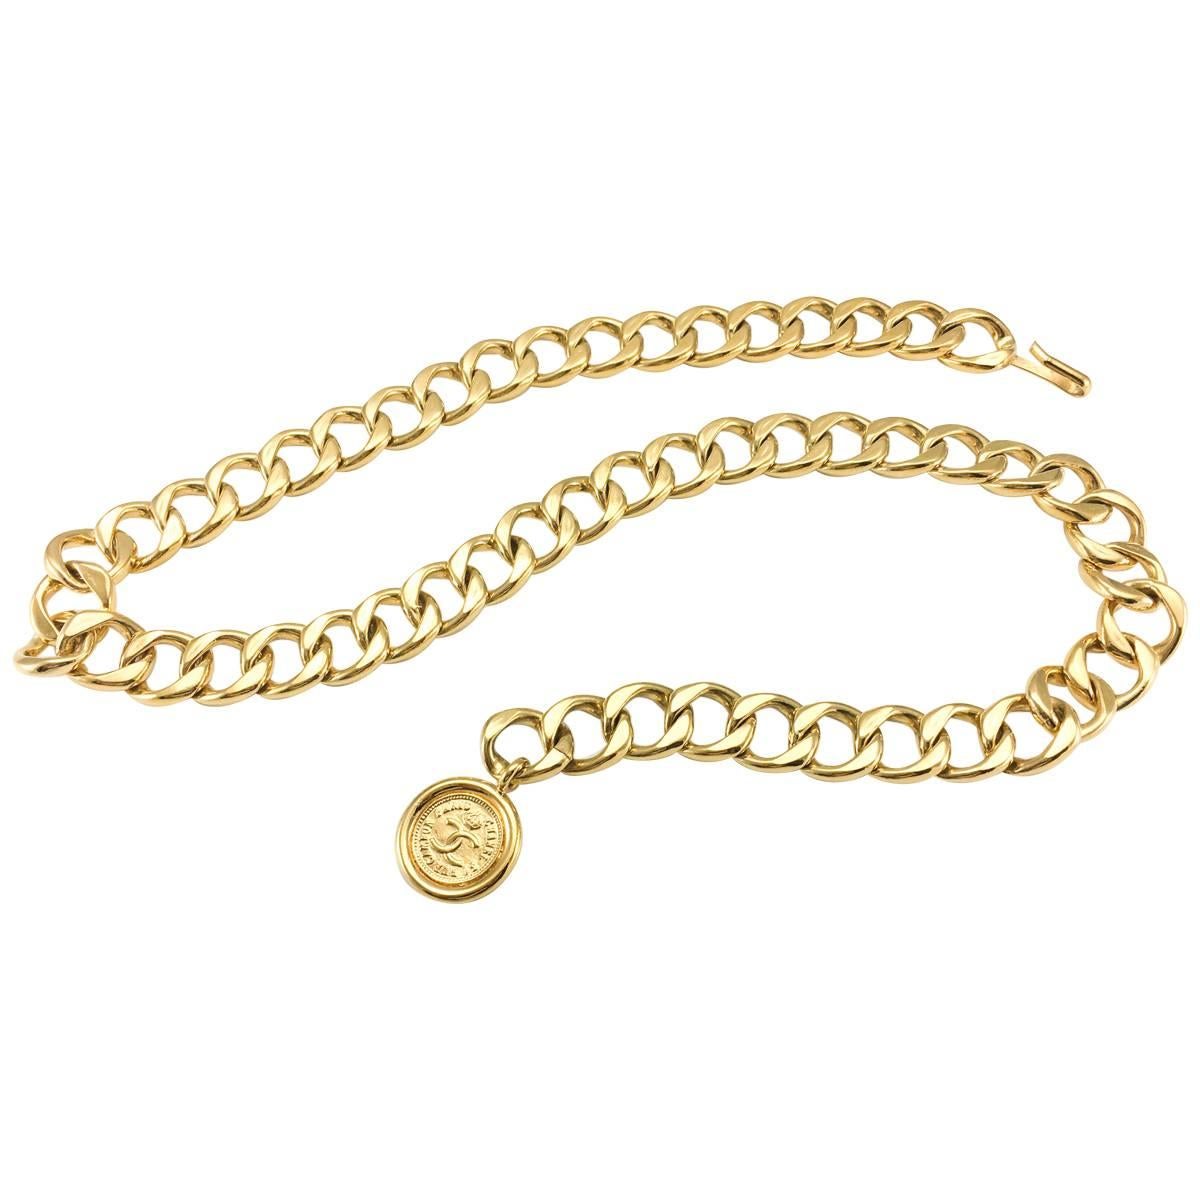 1980's Chanel Gold-Tone Medallion Chain Belt / Necklace